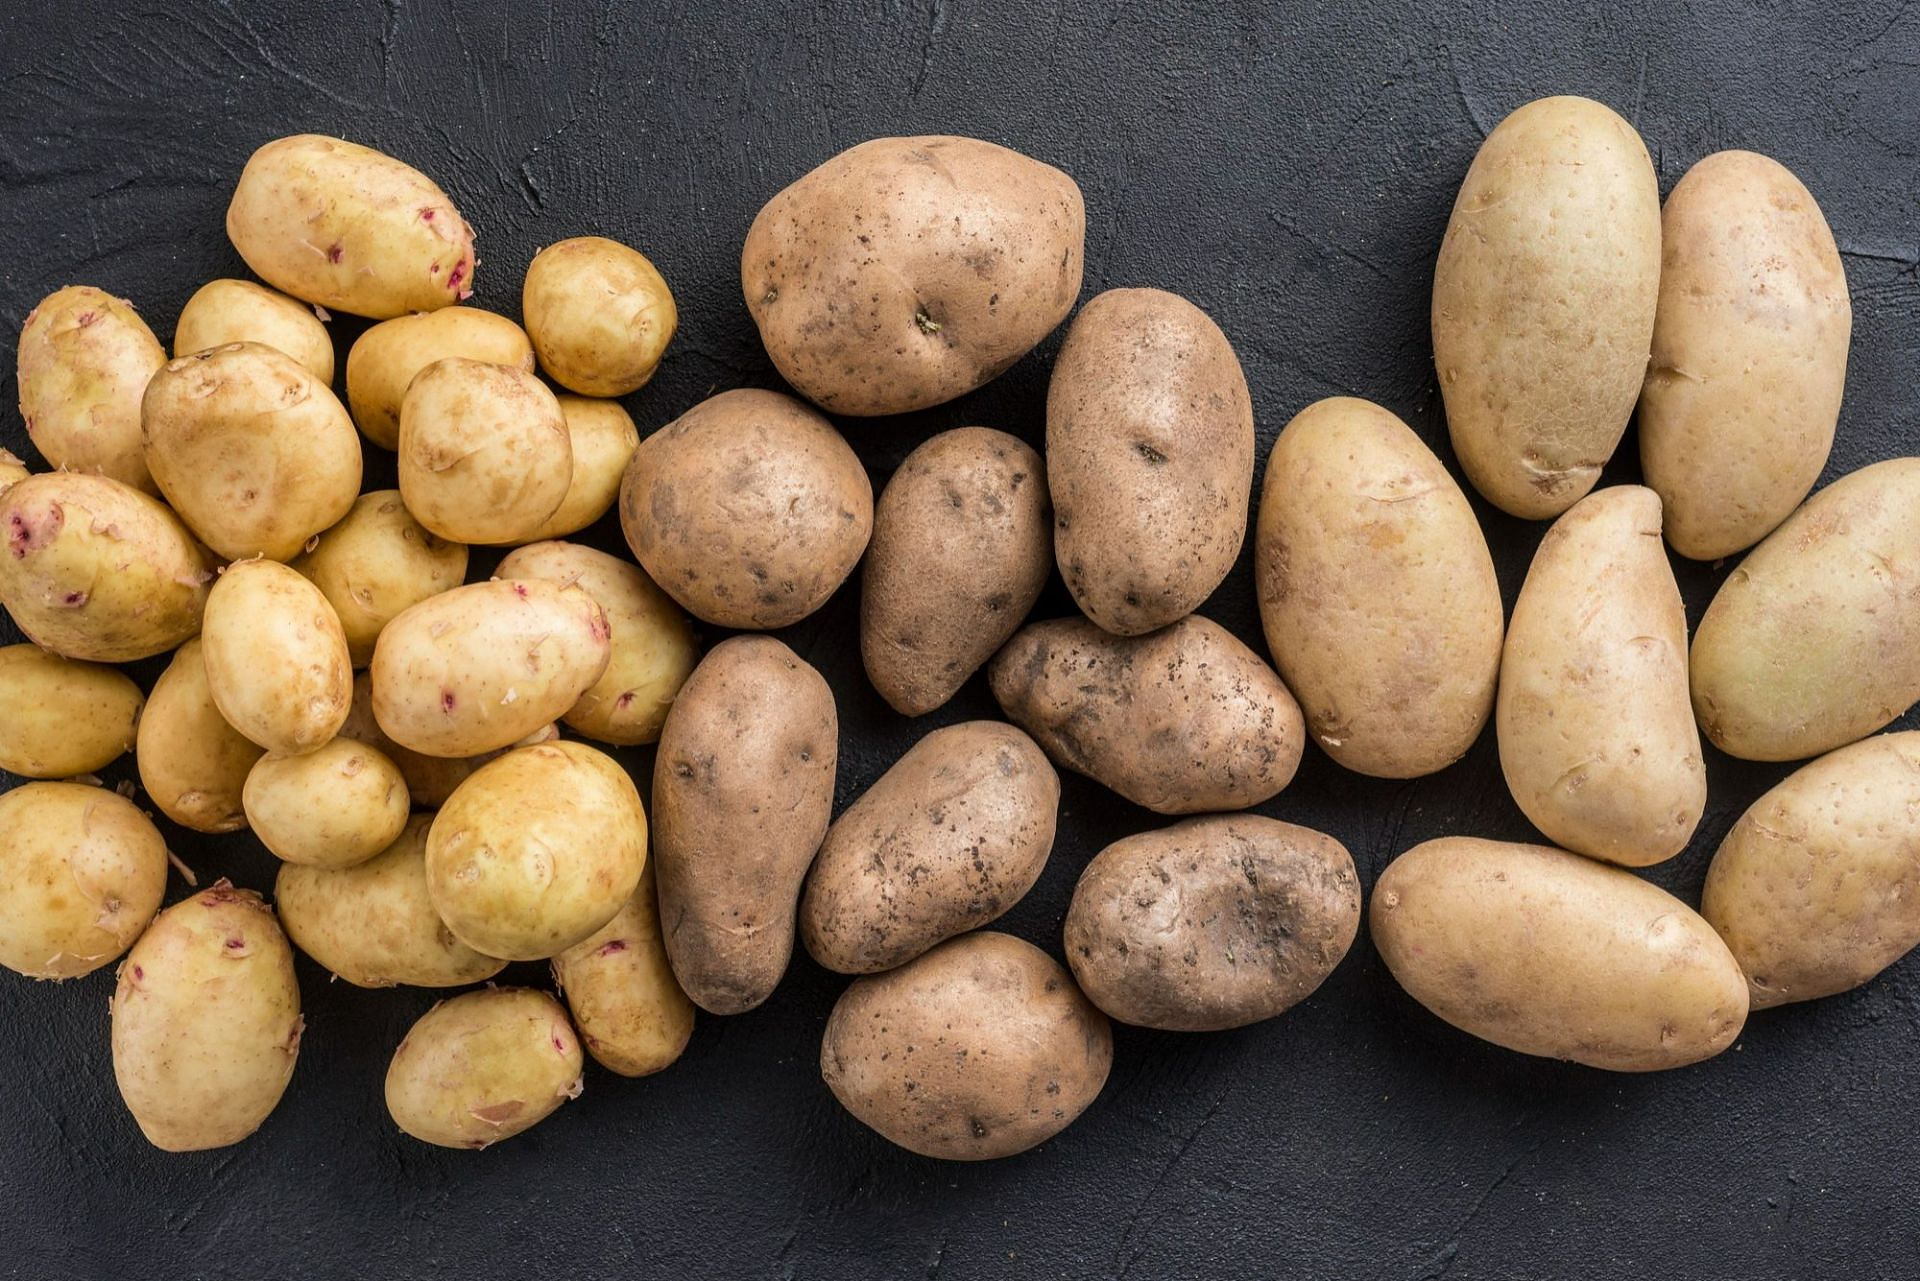 Sprouted potatoes can be toxic (Image by Freepik)